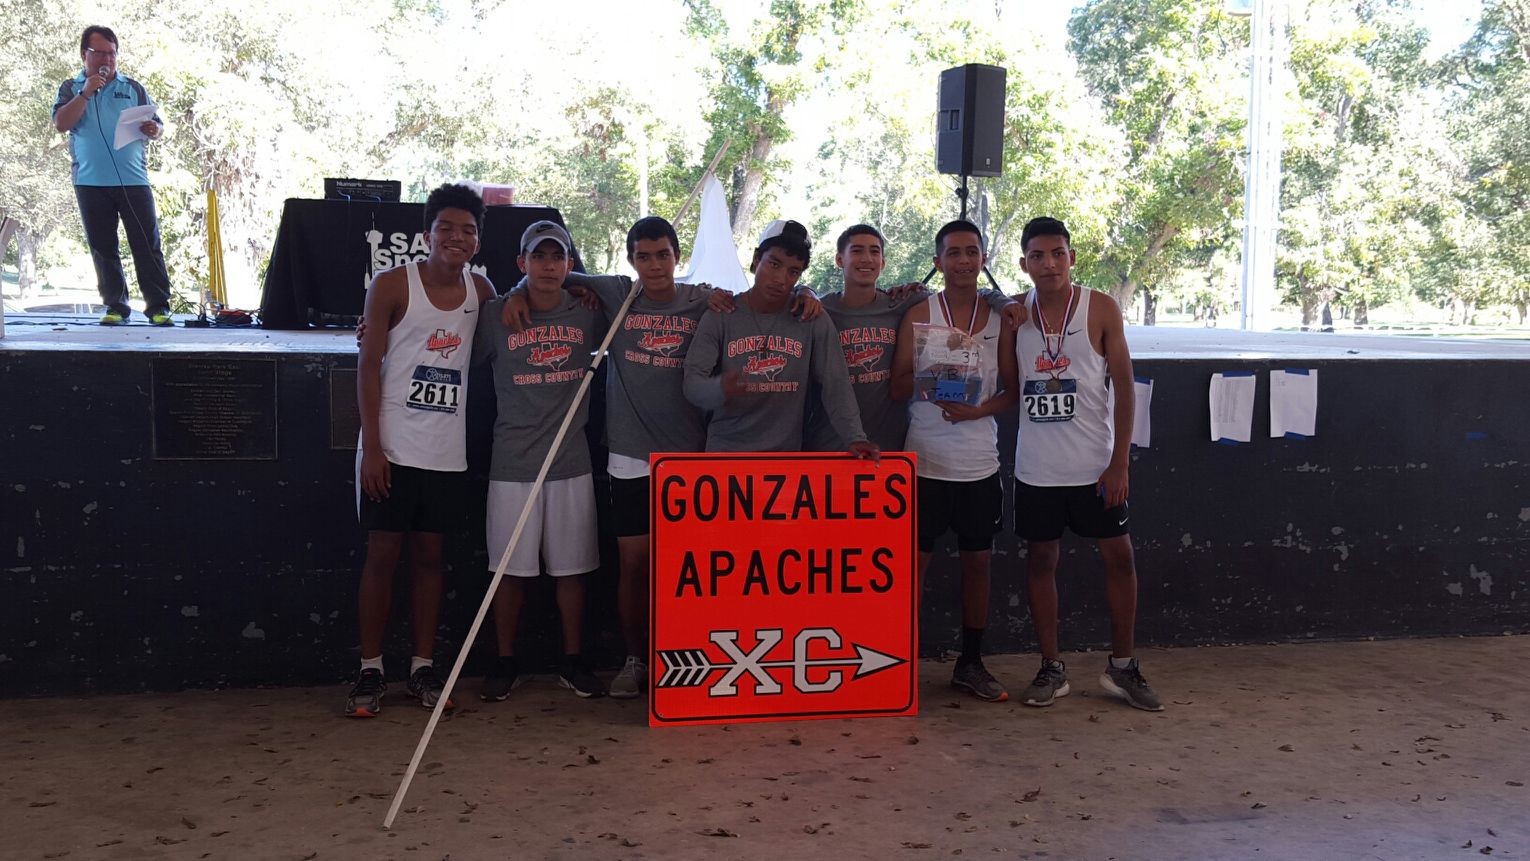 The Gonzales Apaches cross-country boys’ team took third place at the meet, advancing to the regional meet for the first time in two years.